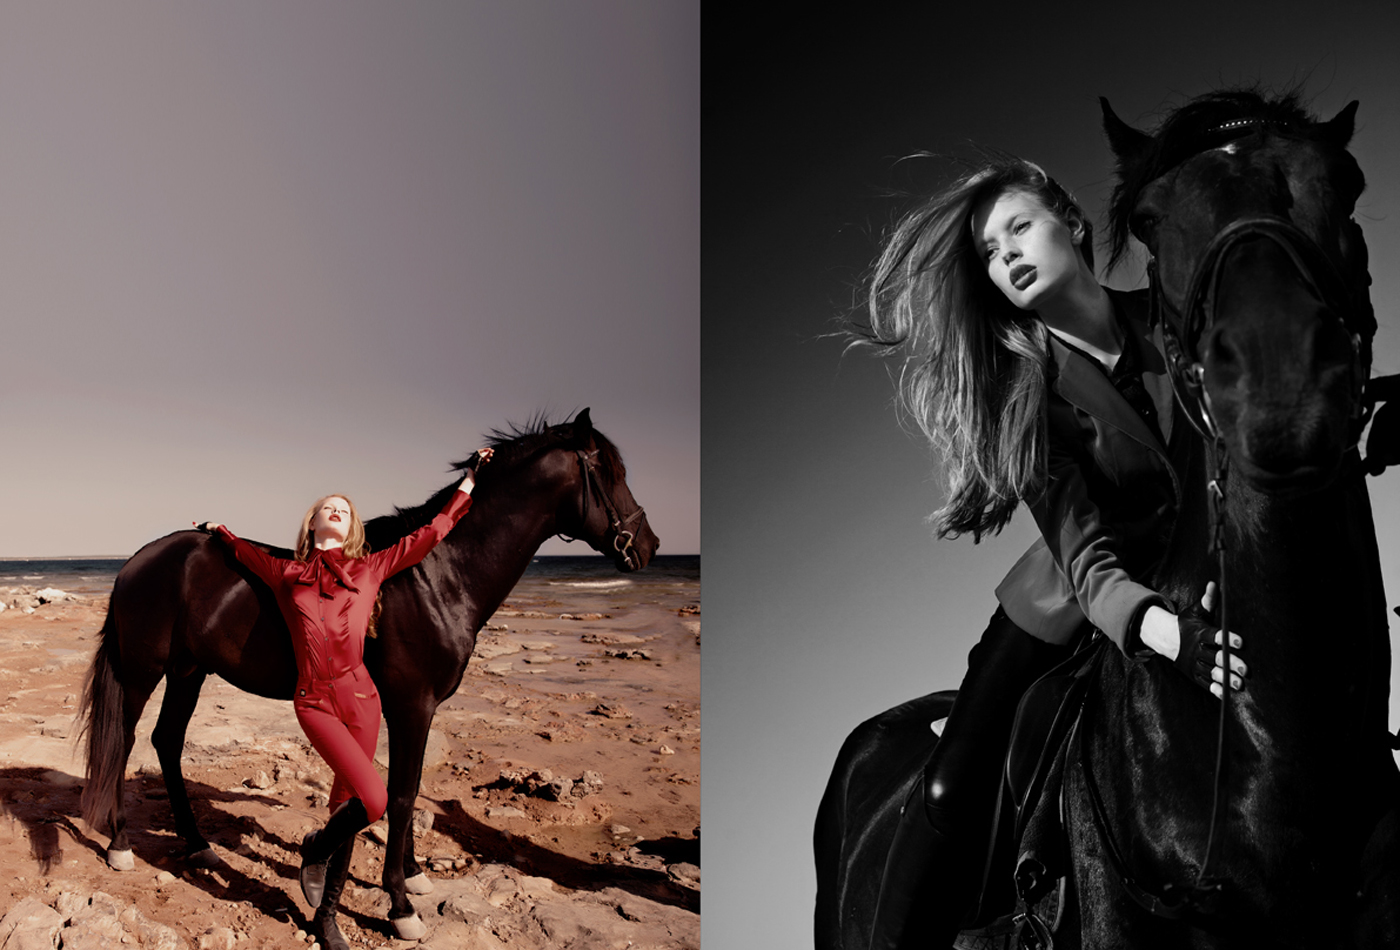 La Cavalière masquée | Andreas Ortner for Equistyle Magazine: Red Riding Hood